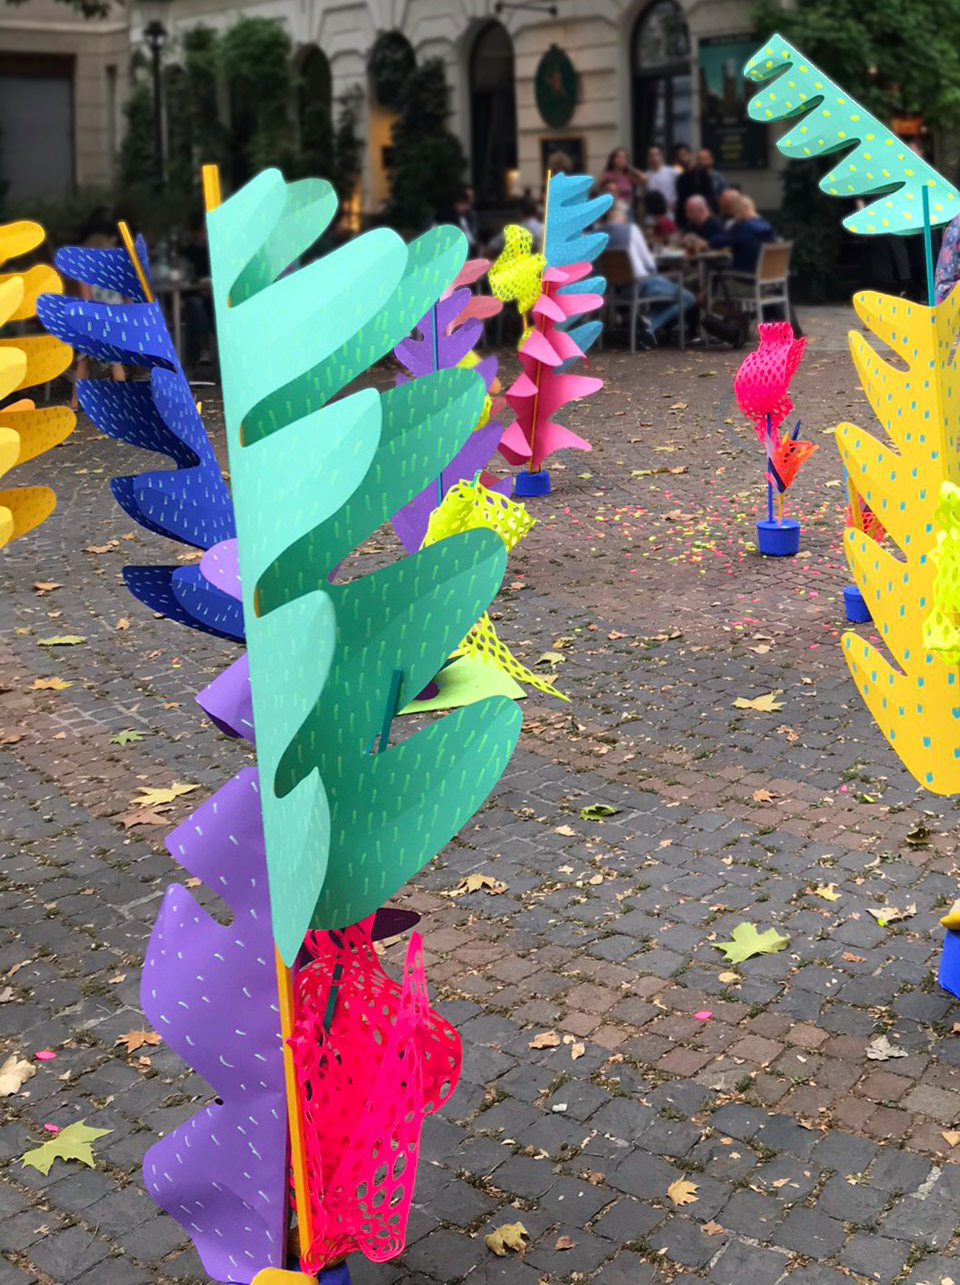 Various colourful paper sculptures standing on the street.